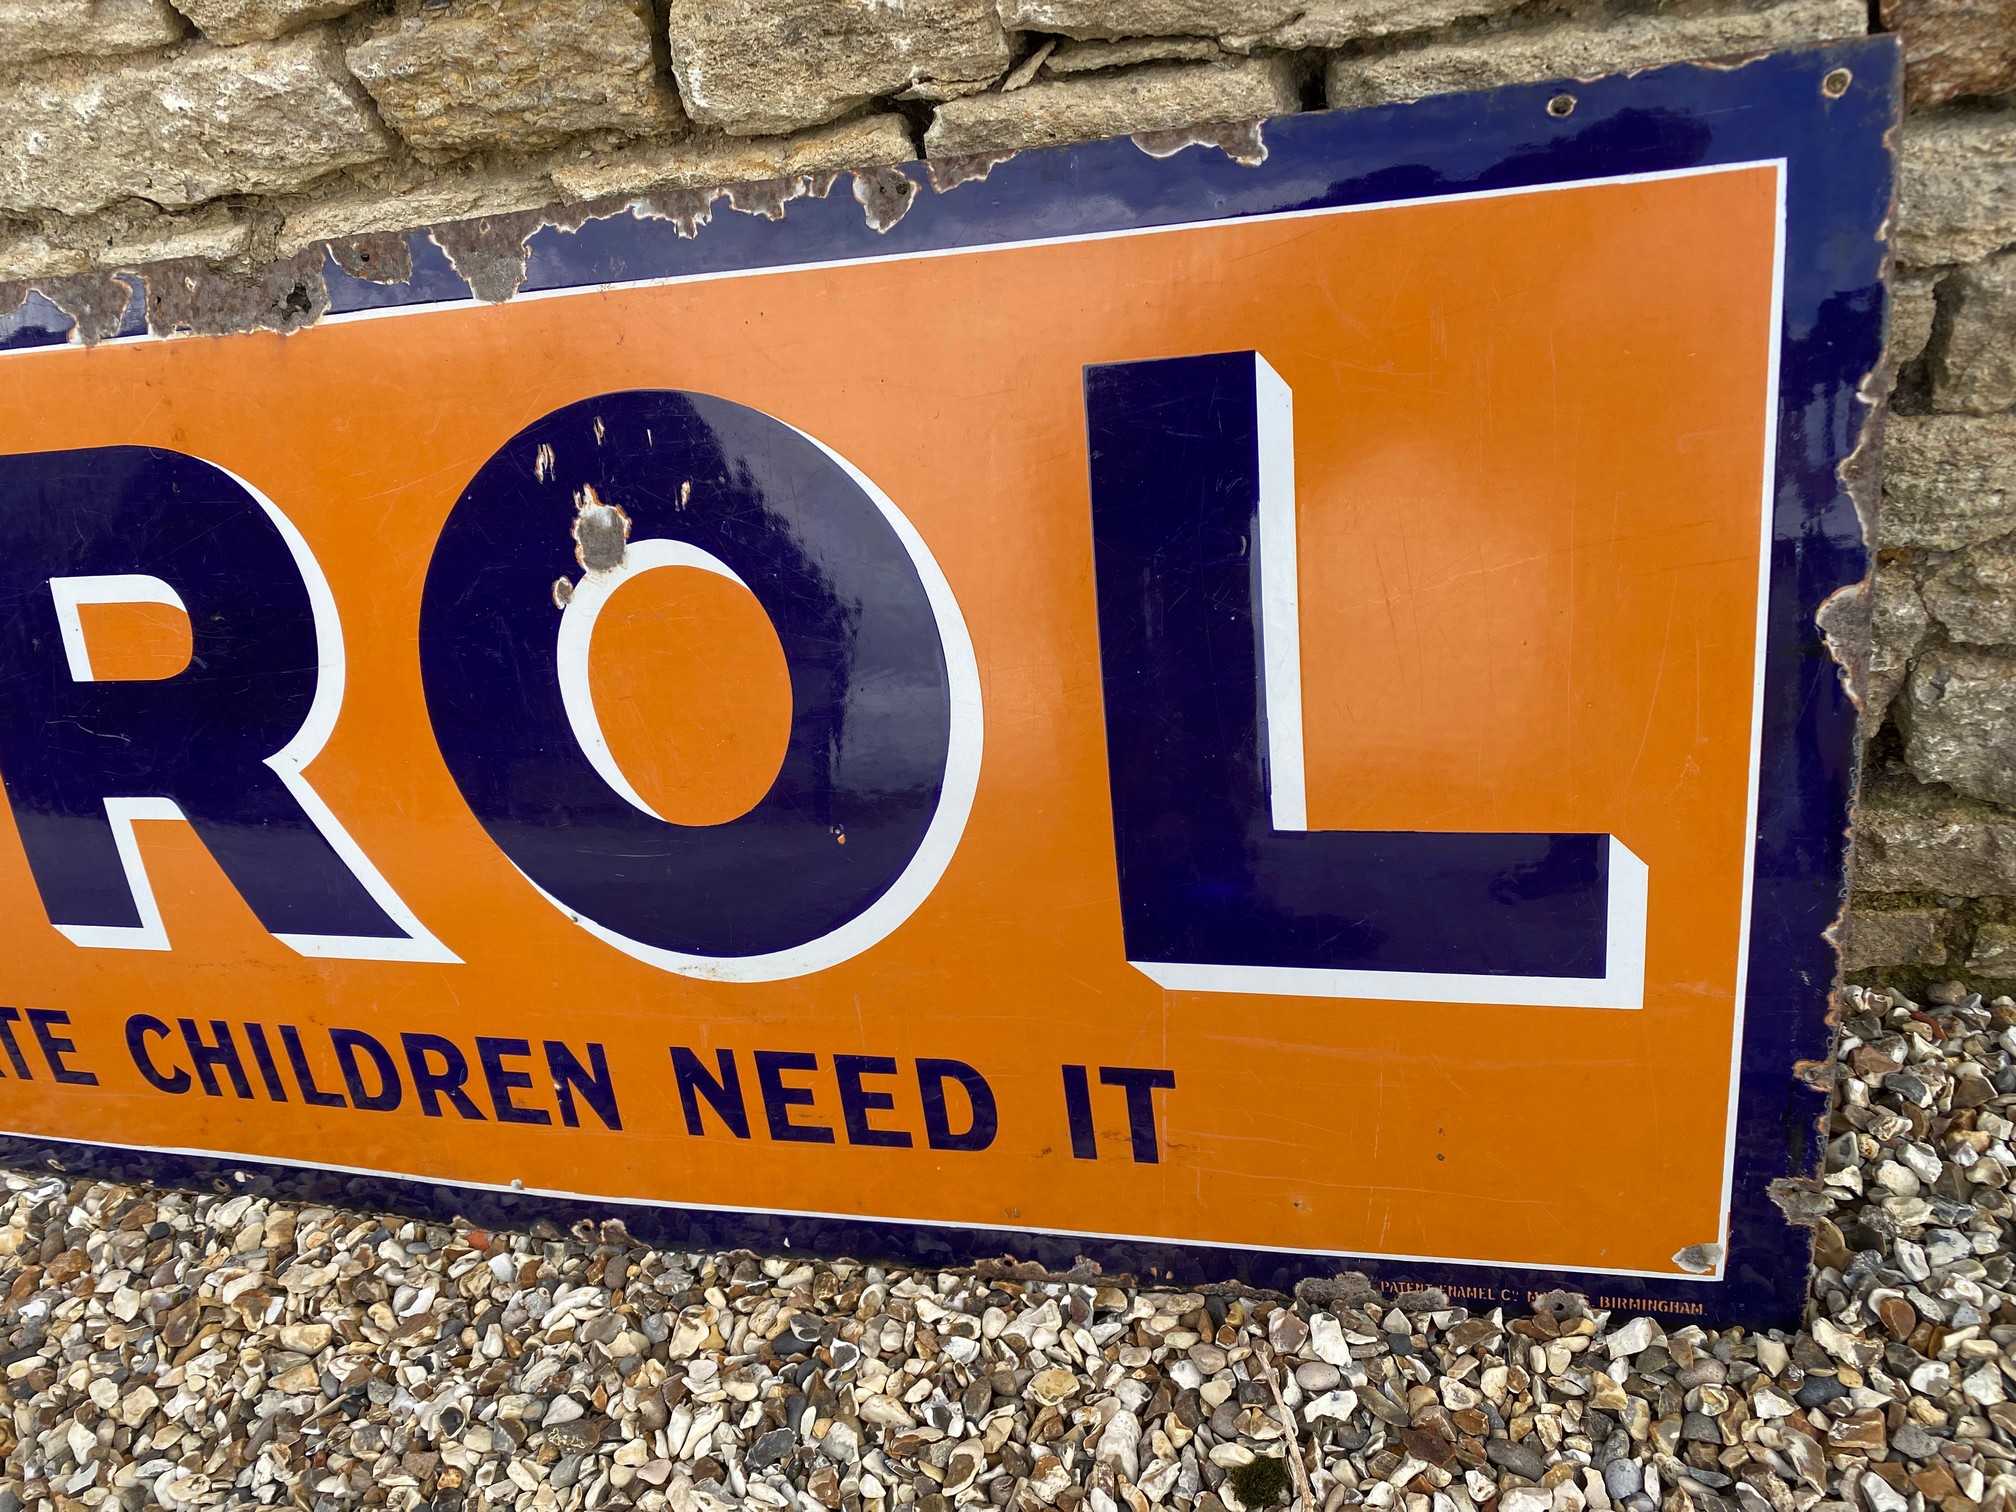 A Virol 'Delicate Children Need It' enamel sign, 78 x 28" - Image 3 of 5